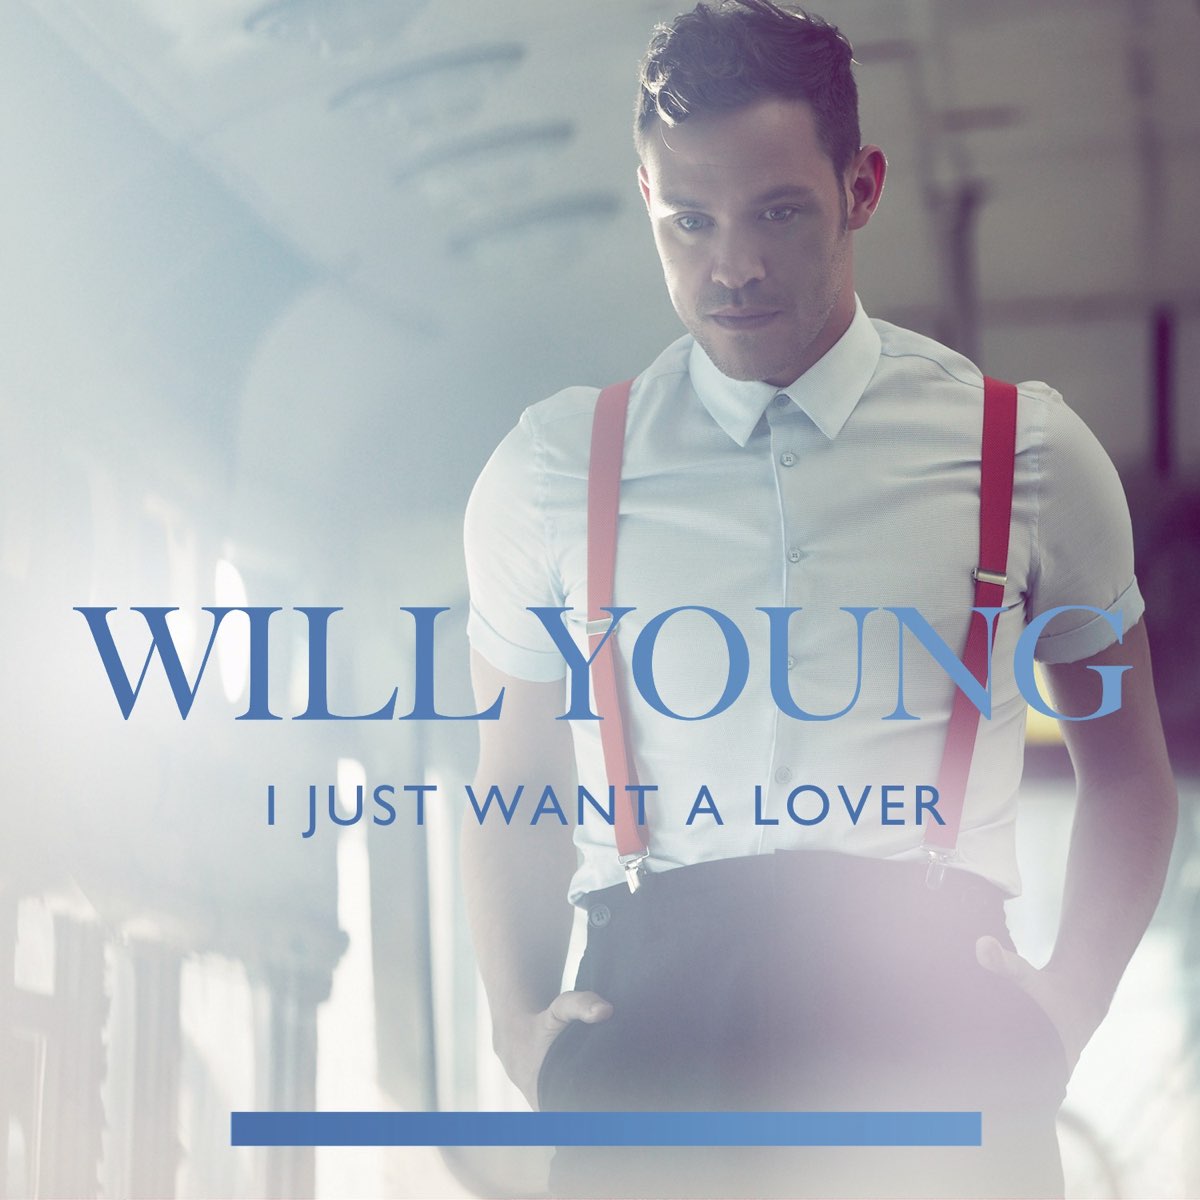 Will young i just want a lover. Lover певец. Will young обложки альбомы. Ловер исполнитель фото. I want a new one